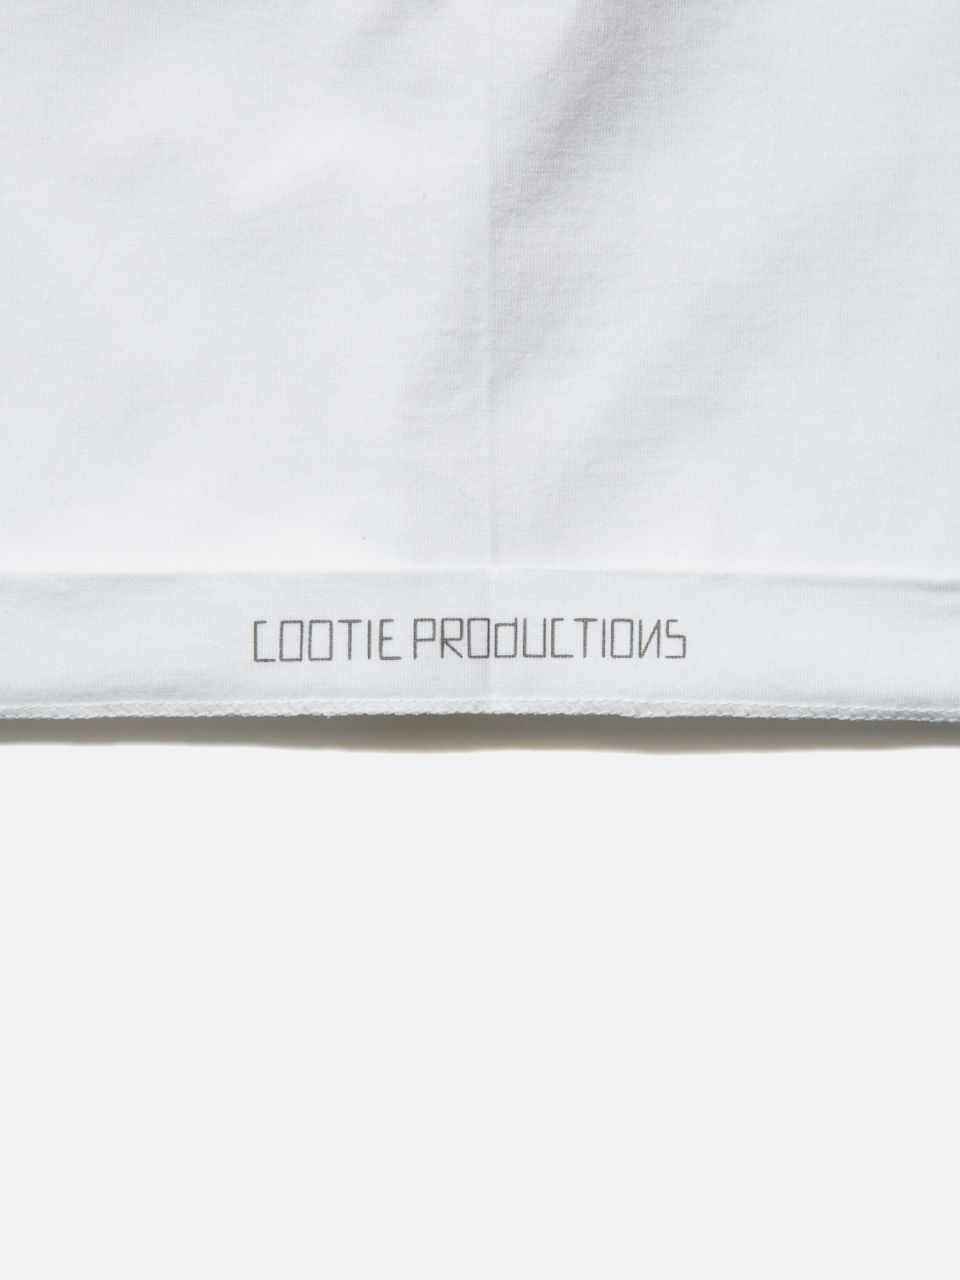 COOTIE クーティ 通販 19SS Supima Cotton Oversized S/S Tee